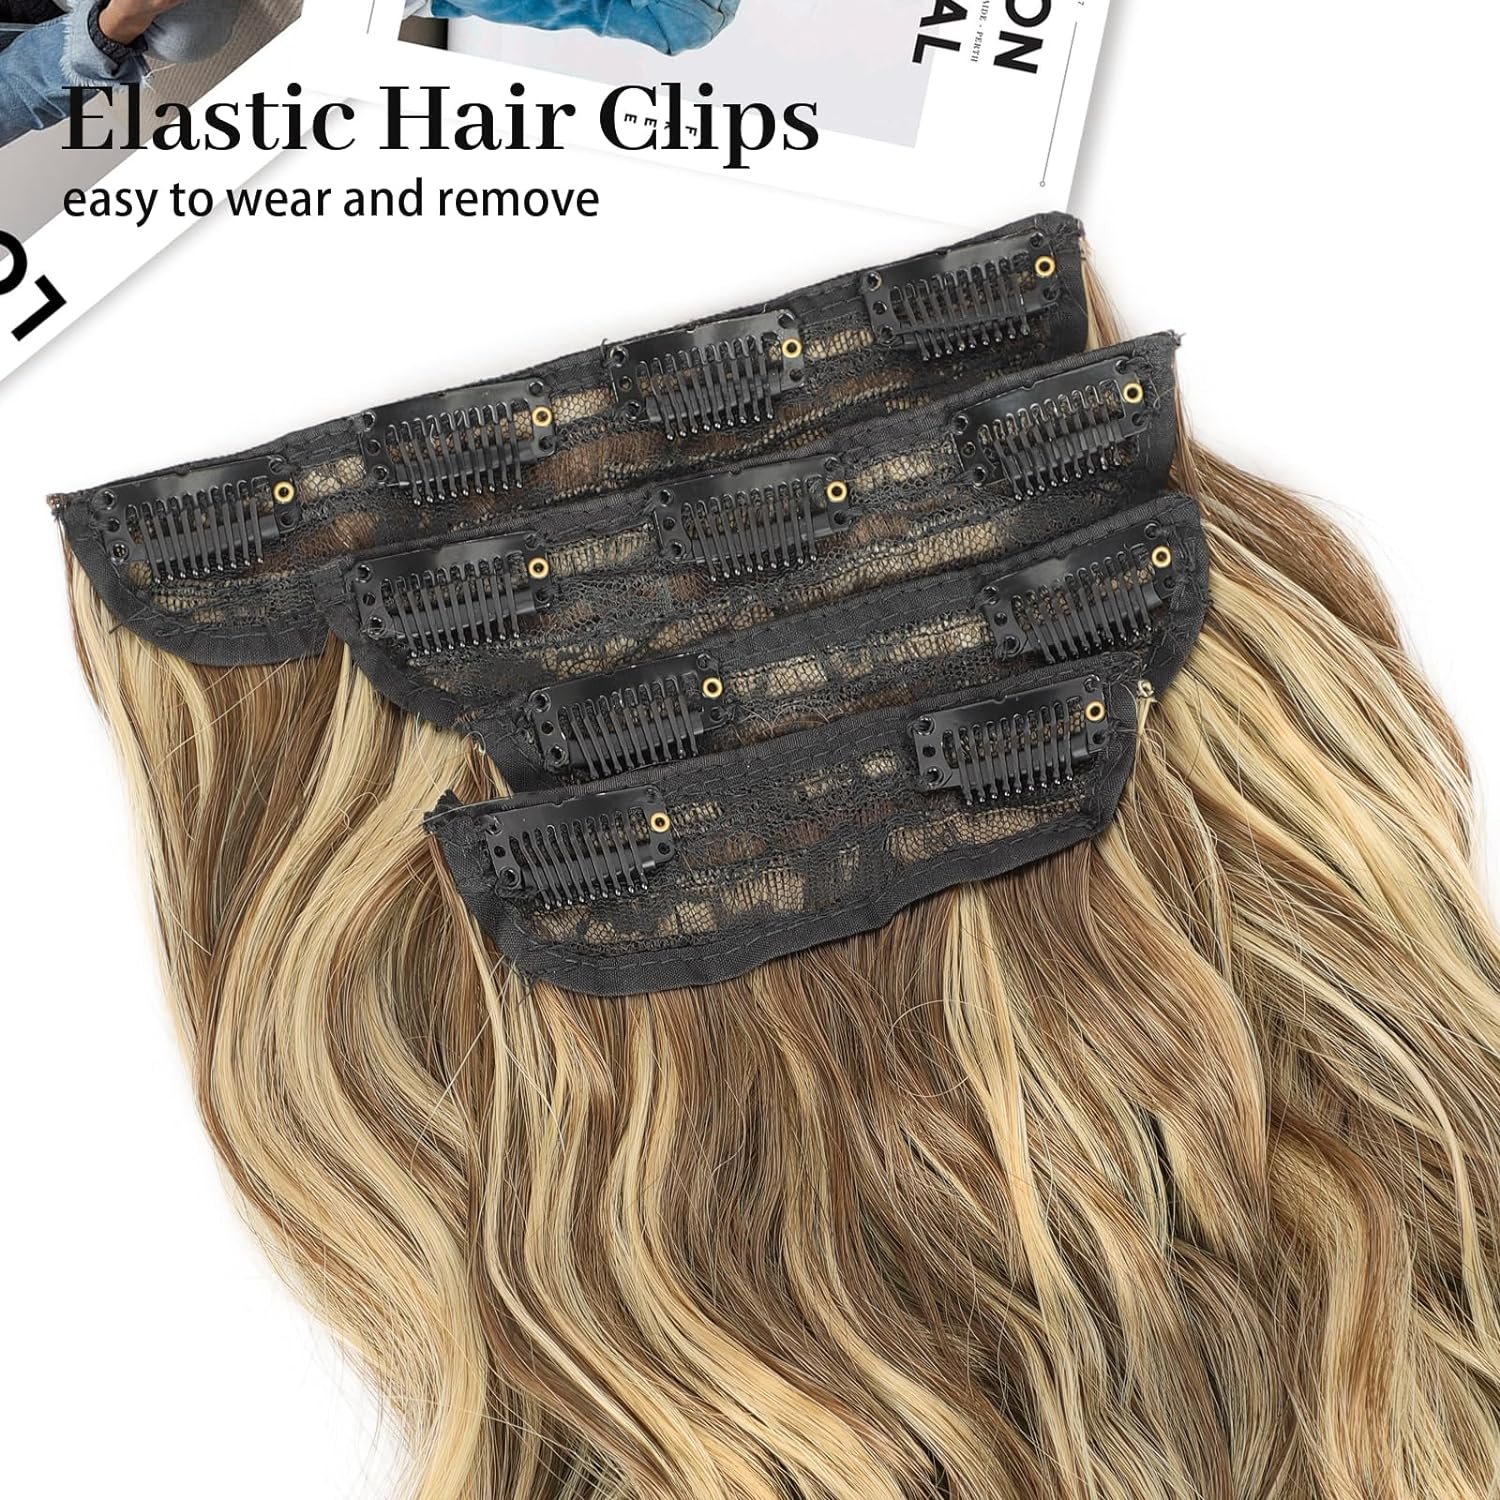 KooKaStyle Hair Extension Review